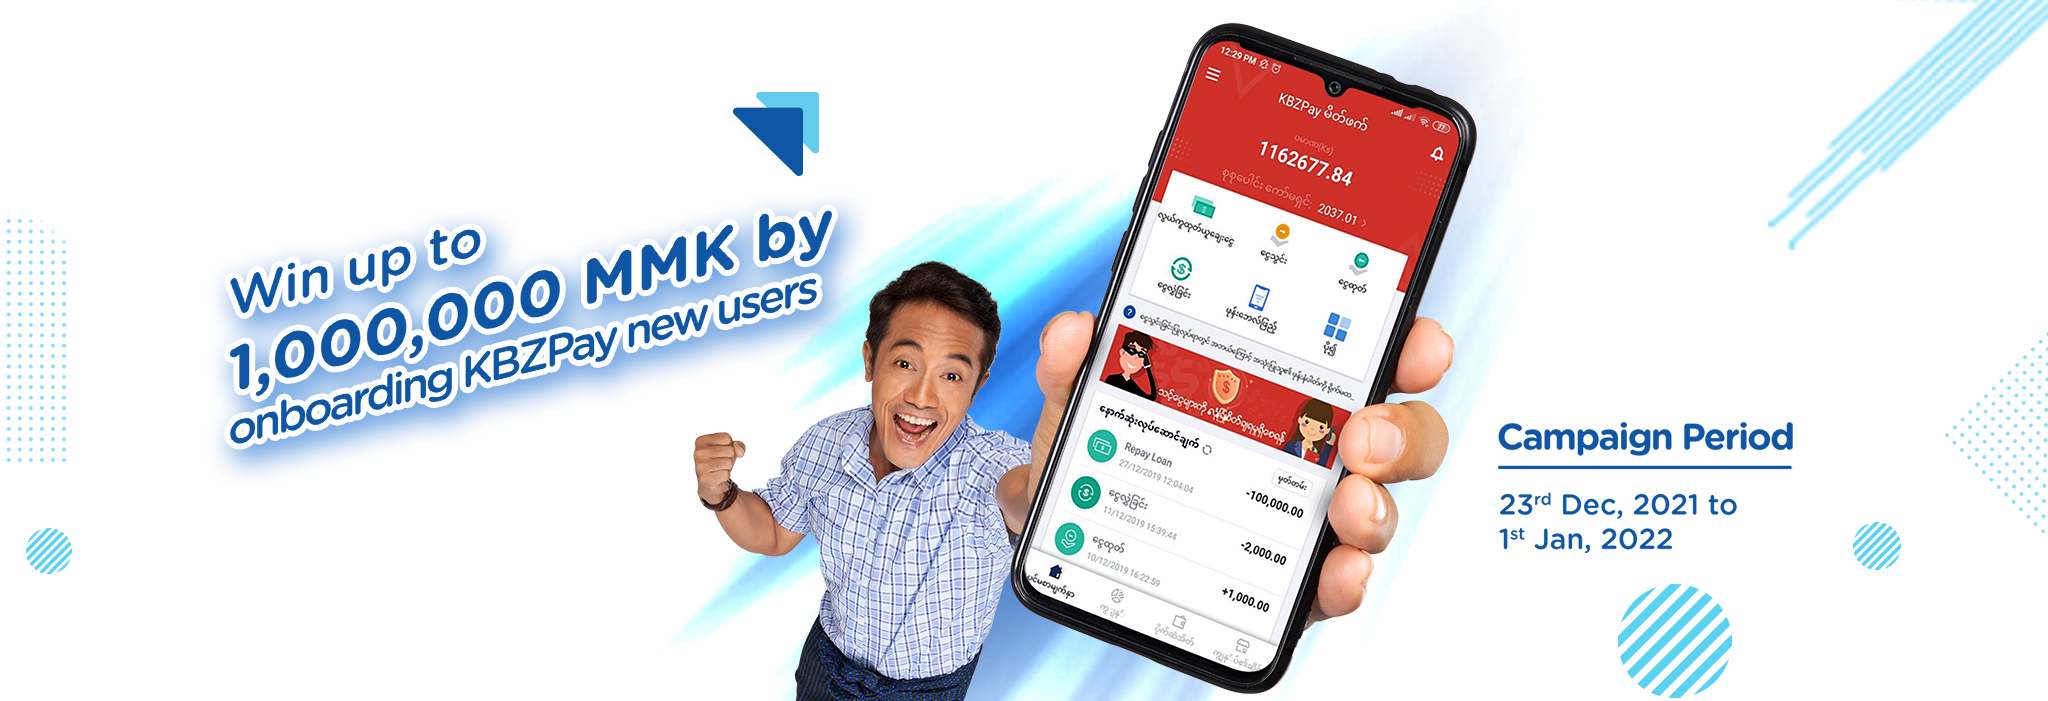 Win up to 1,000,000 MMK by onboarding KBZPay new users